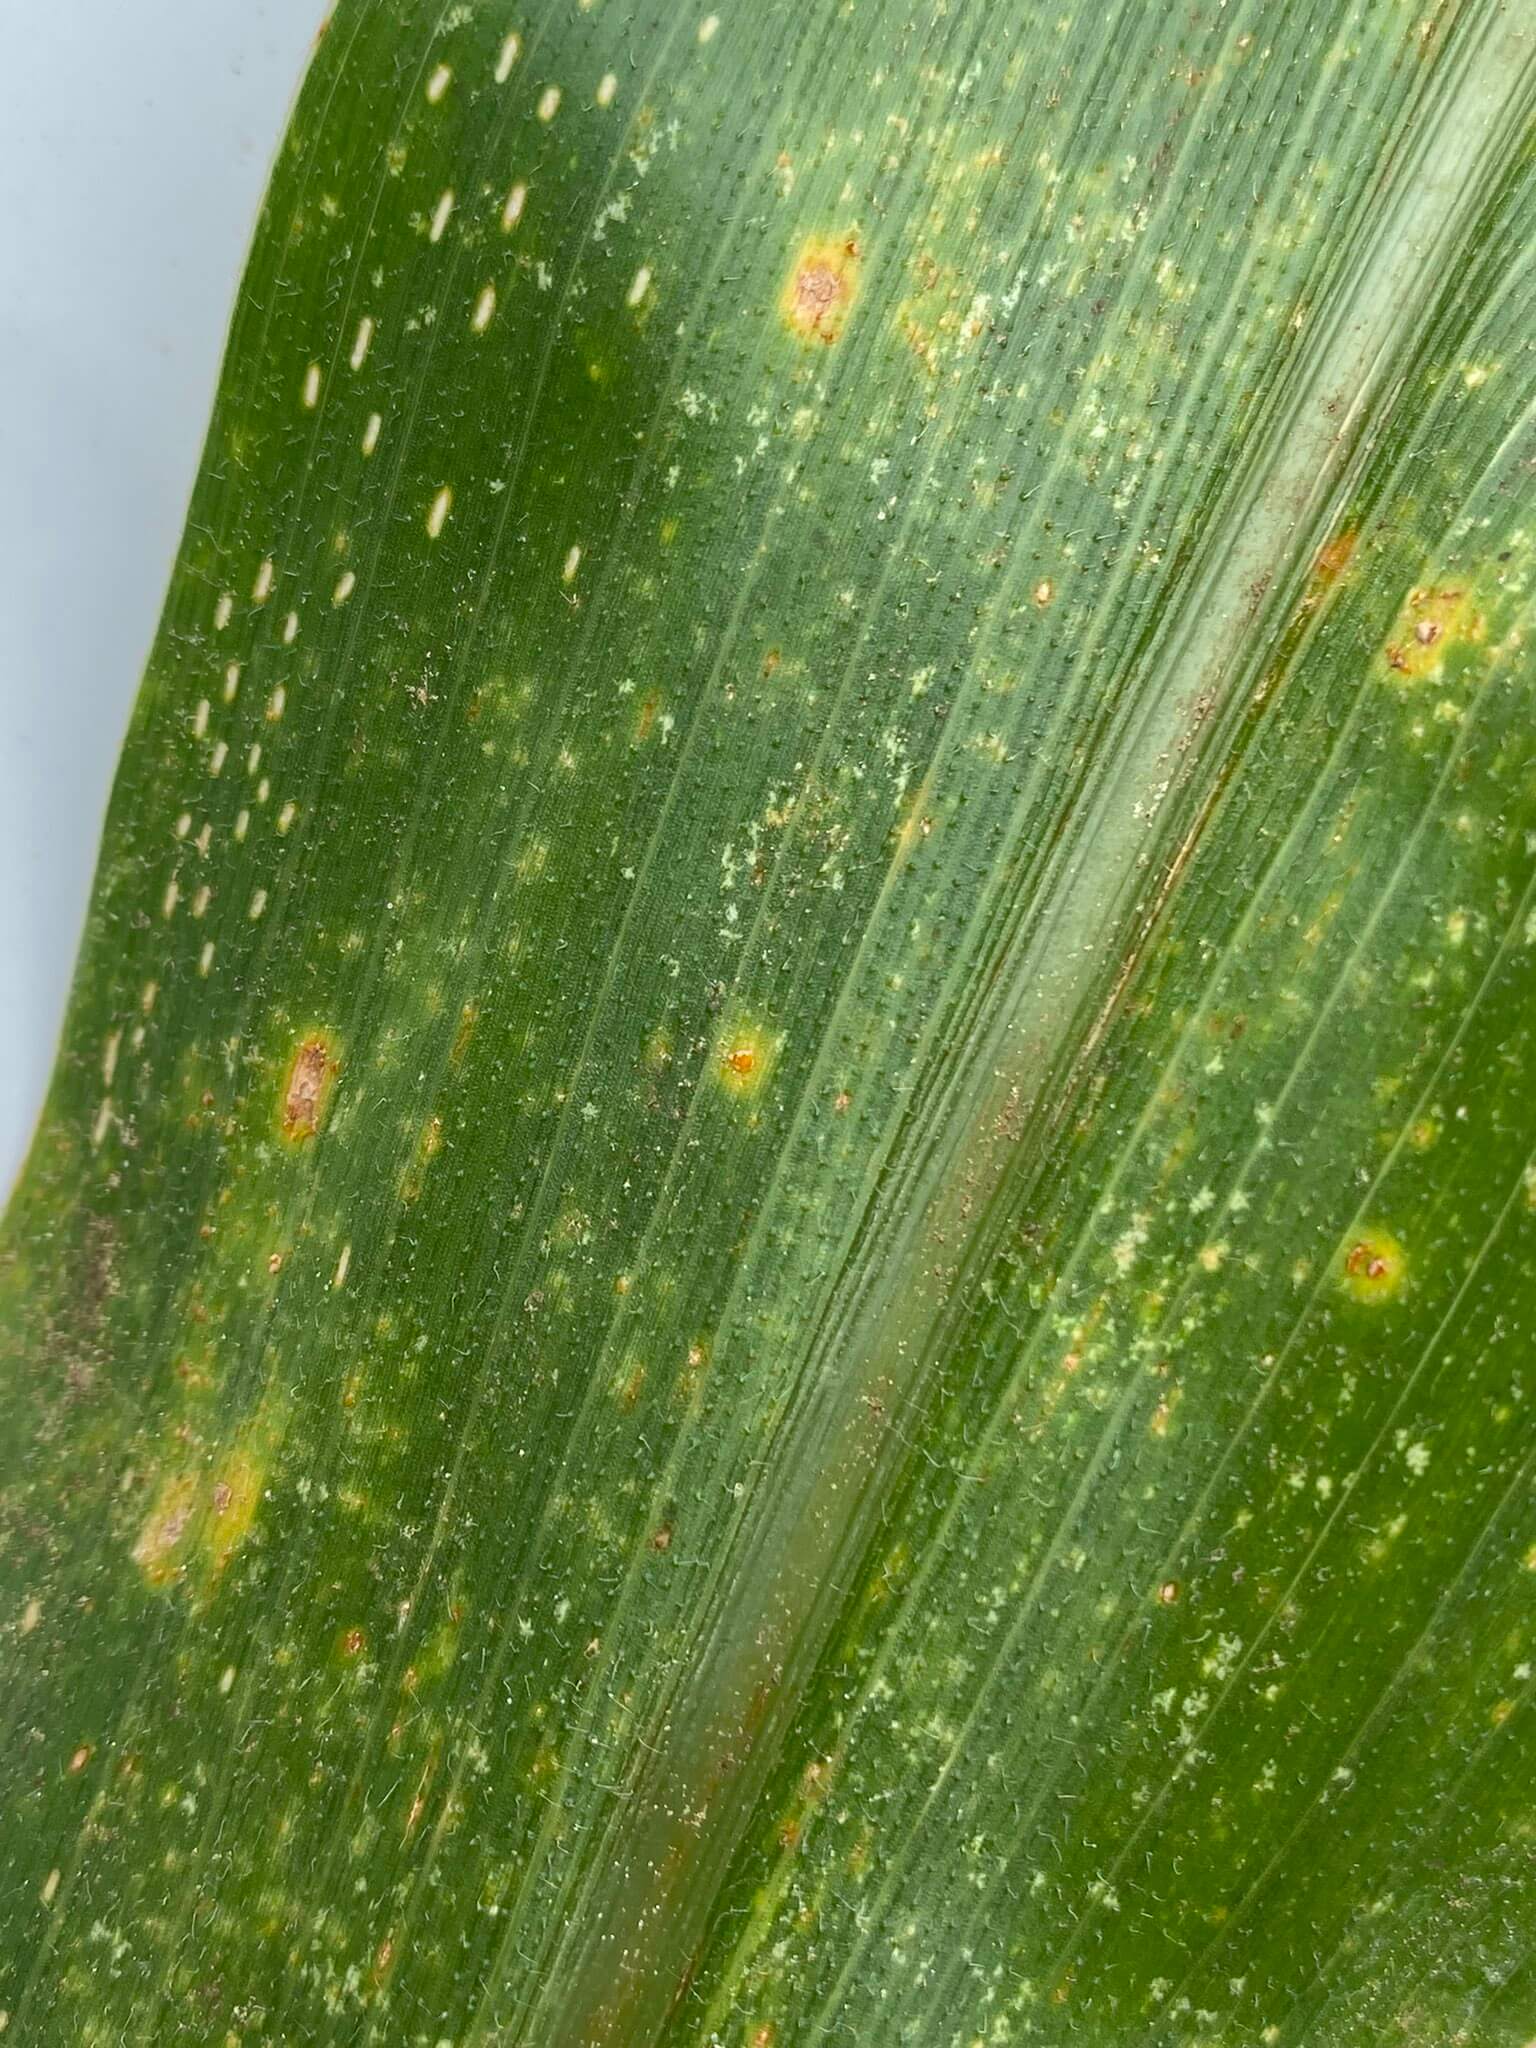 Orange spores emerge from southern rust pustules on a corn leaf. The fungal spores associated with this disease can be carried long distances on wind currents from surrounding states. (Submitted photo)